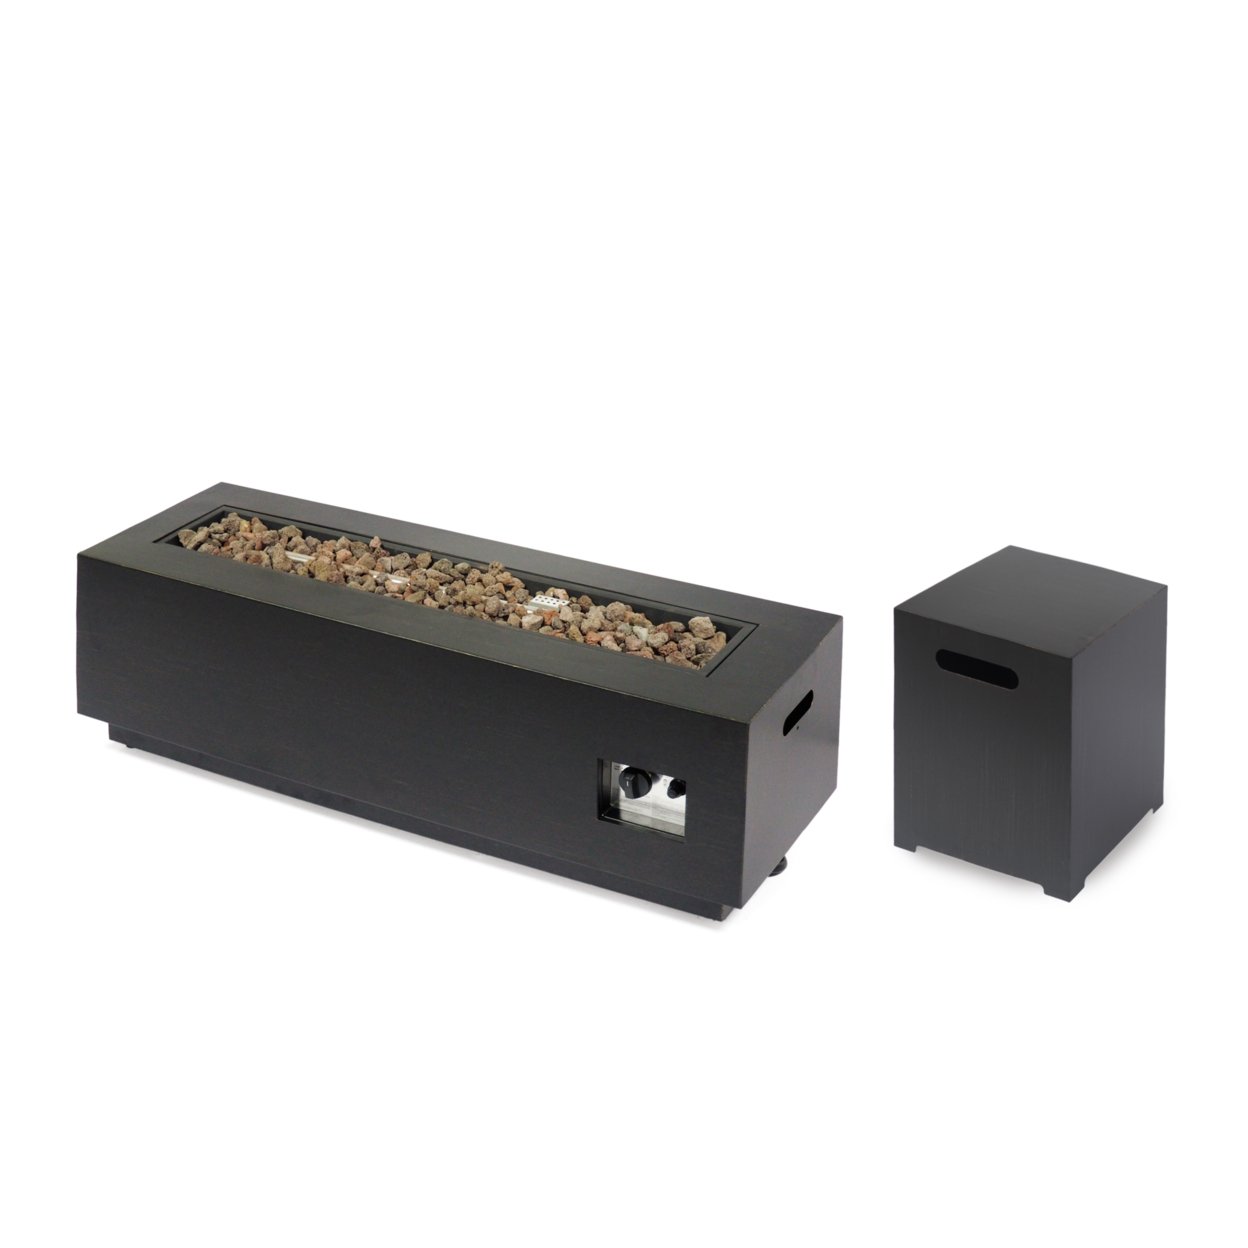 Hemmingway Outdoor Rectangular Fire Pit With Tank Holder - Concrete Finish